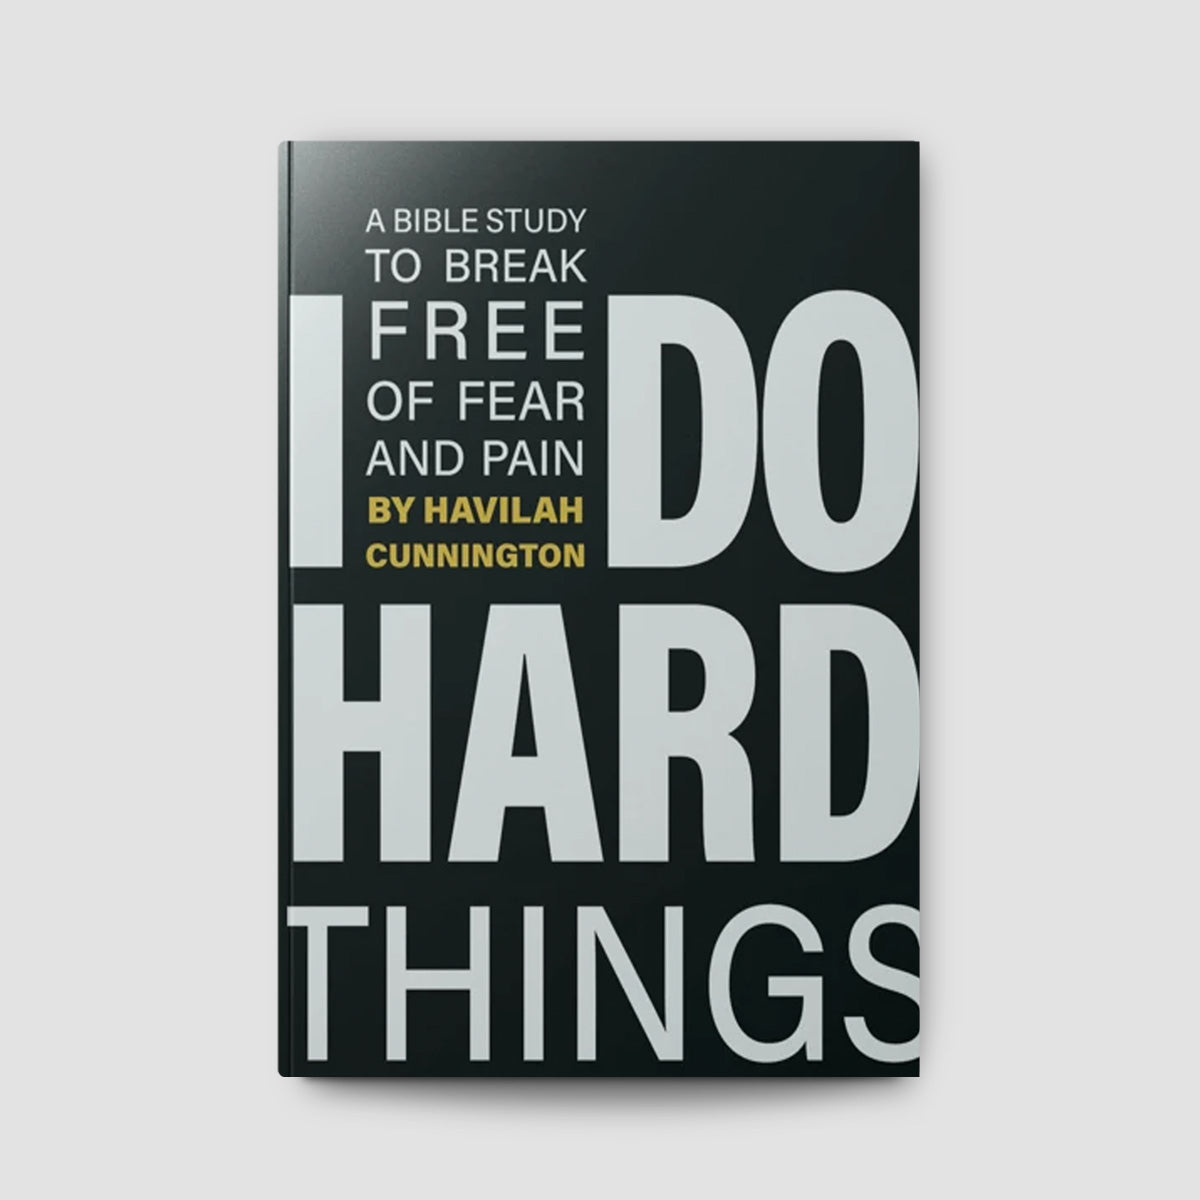 I Do Hard Things: A Bible Study to Break Free of Fear and Pain